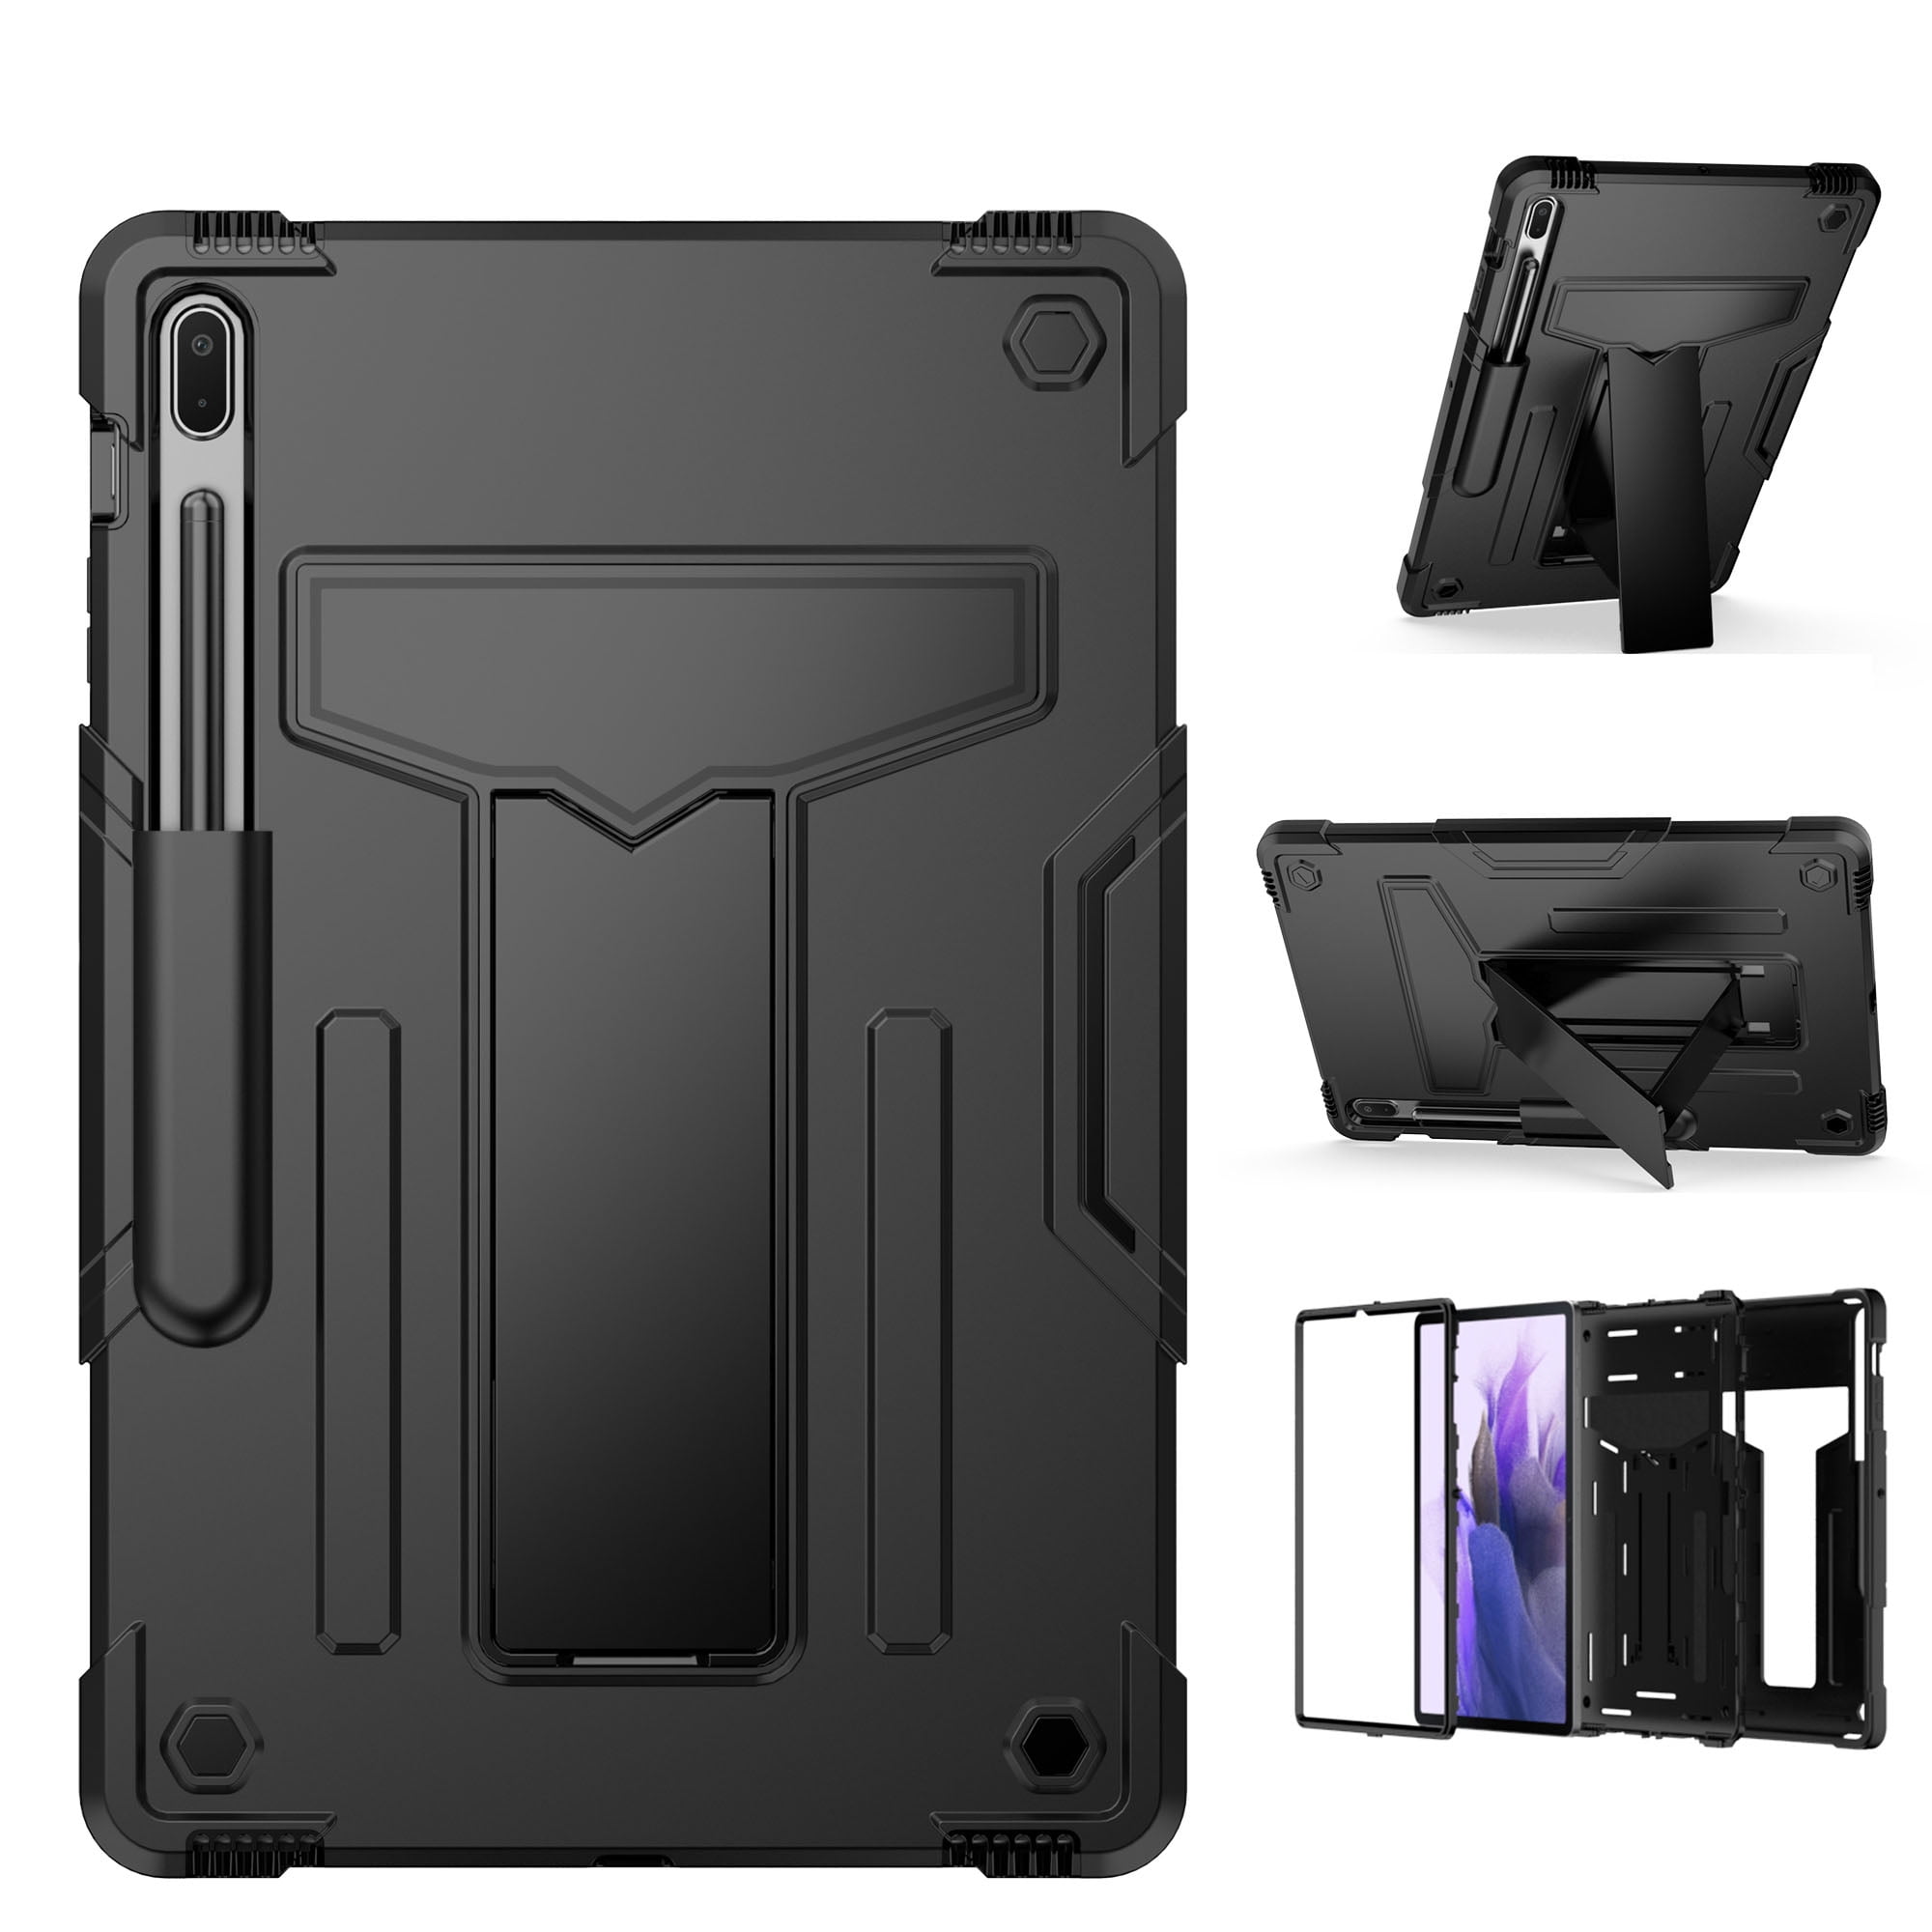 Galaxy Tab S7 FE 2021 Case with Pen Holder, SM-T730/SM-T736B Cover ...